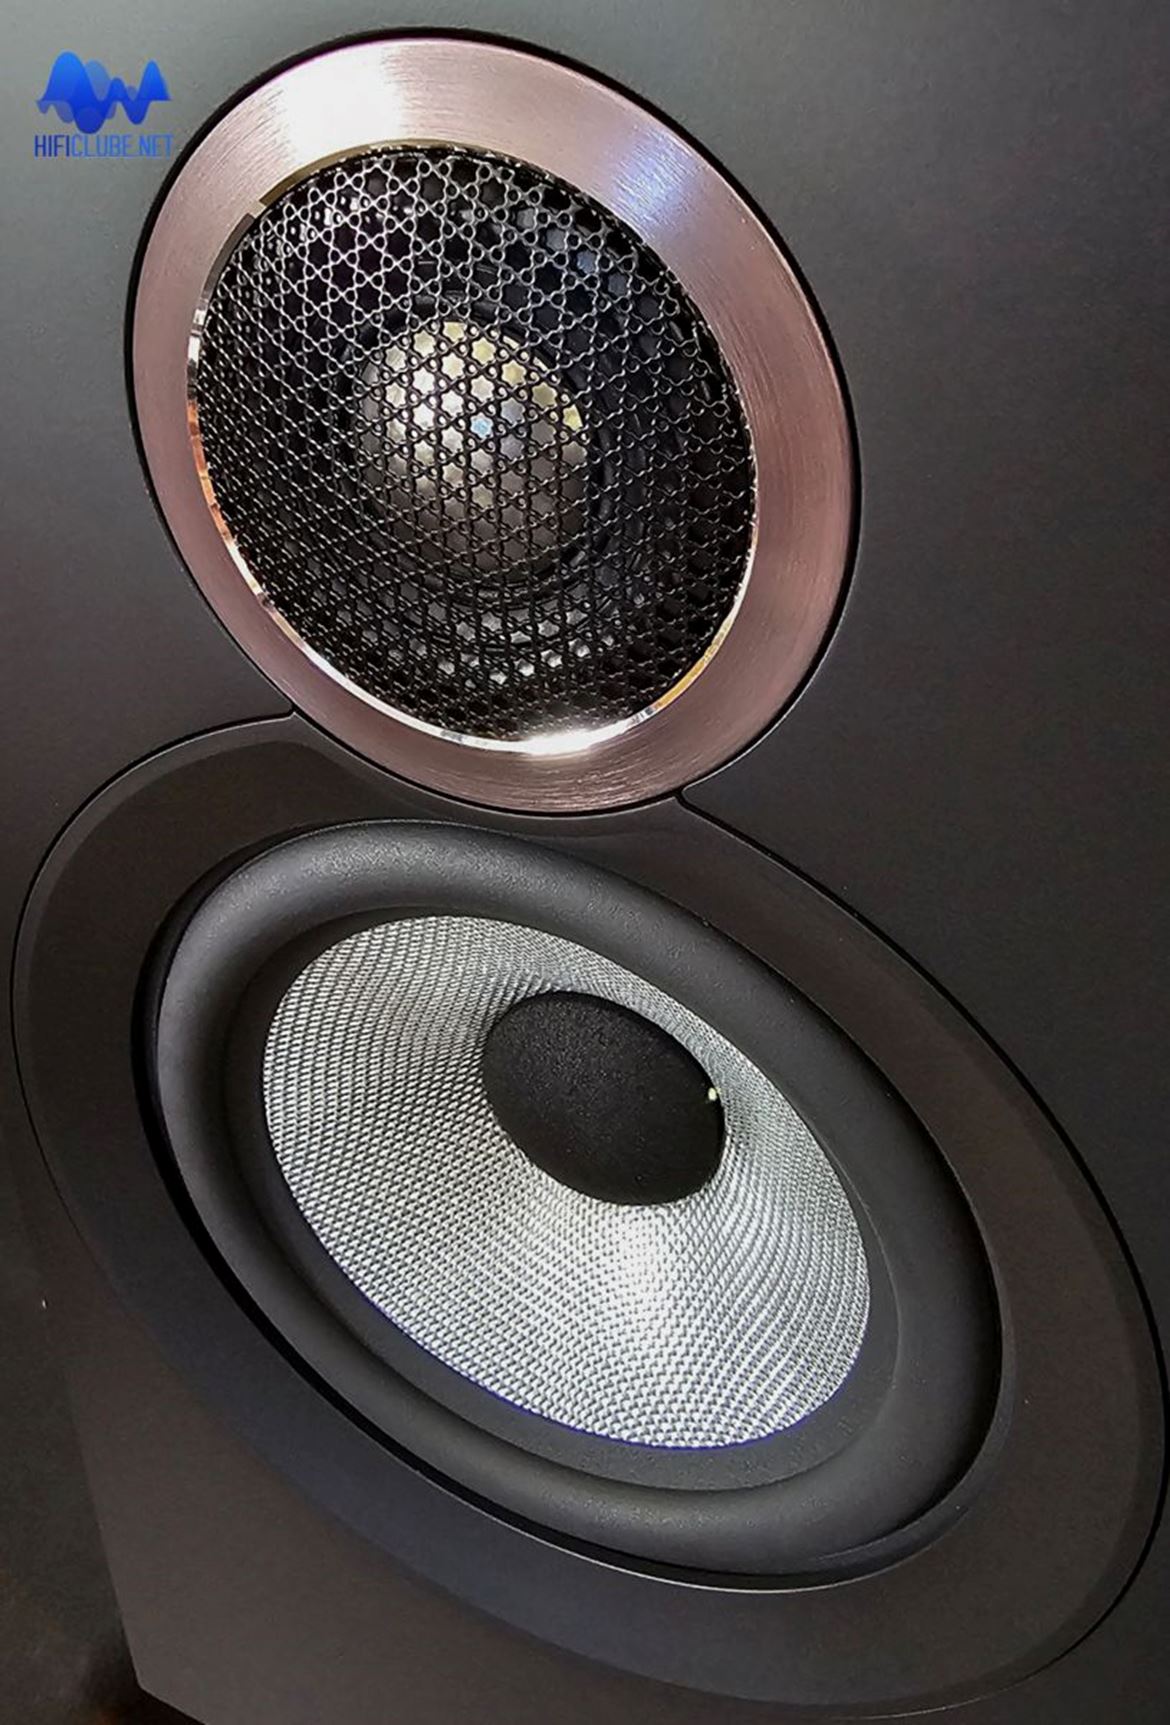 The tweeter and the mid-bass driver are now mounted so close to each other as to even overlap slightly.